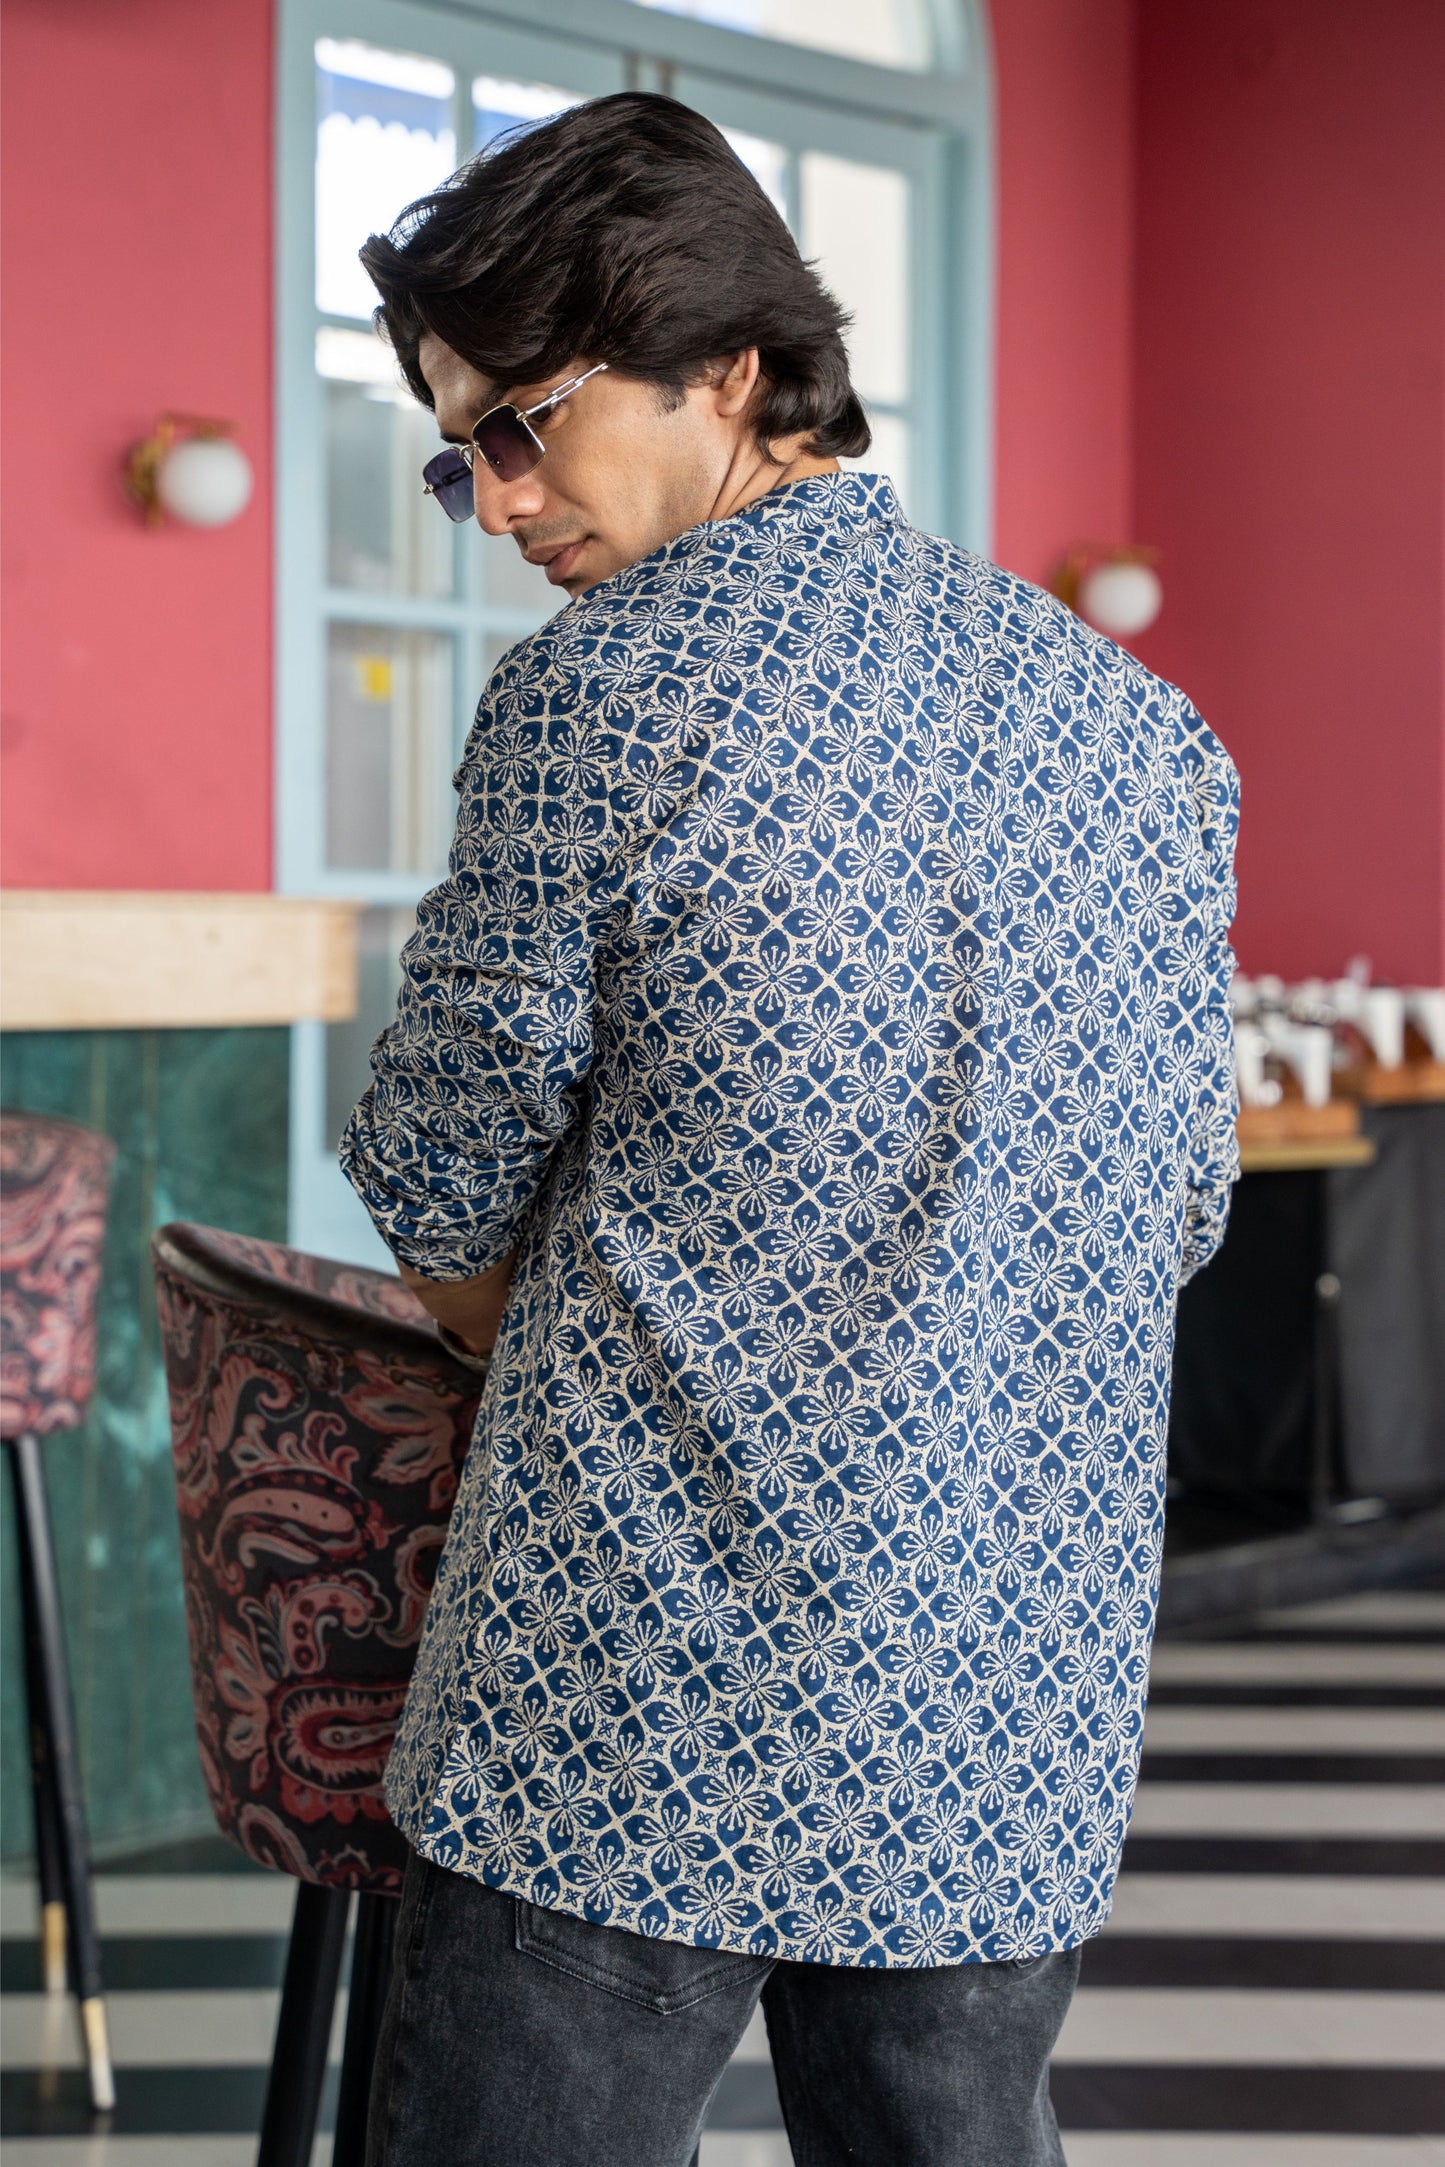 The Off-White And Royal Blue All-Over Floral Print Short Kurta